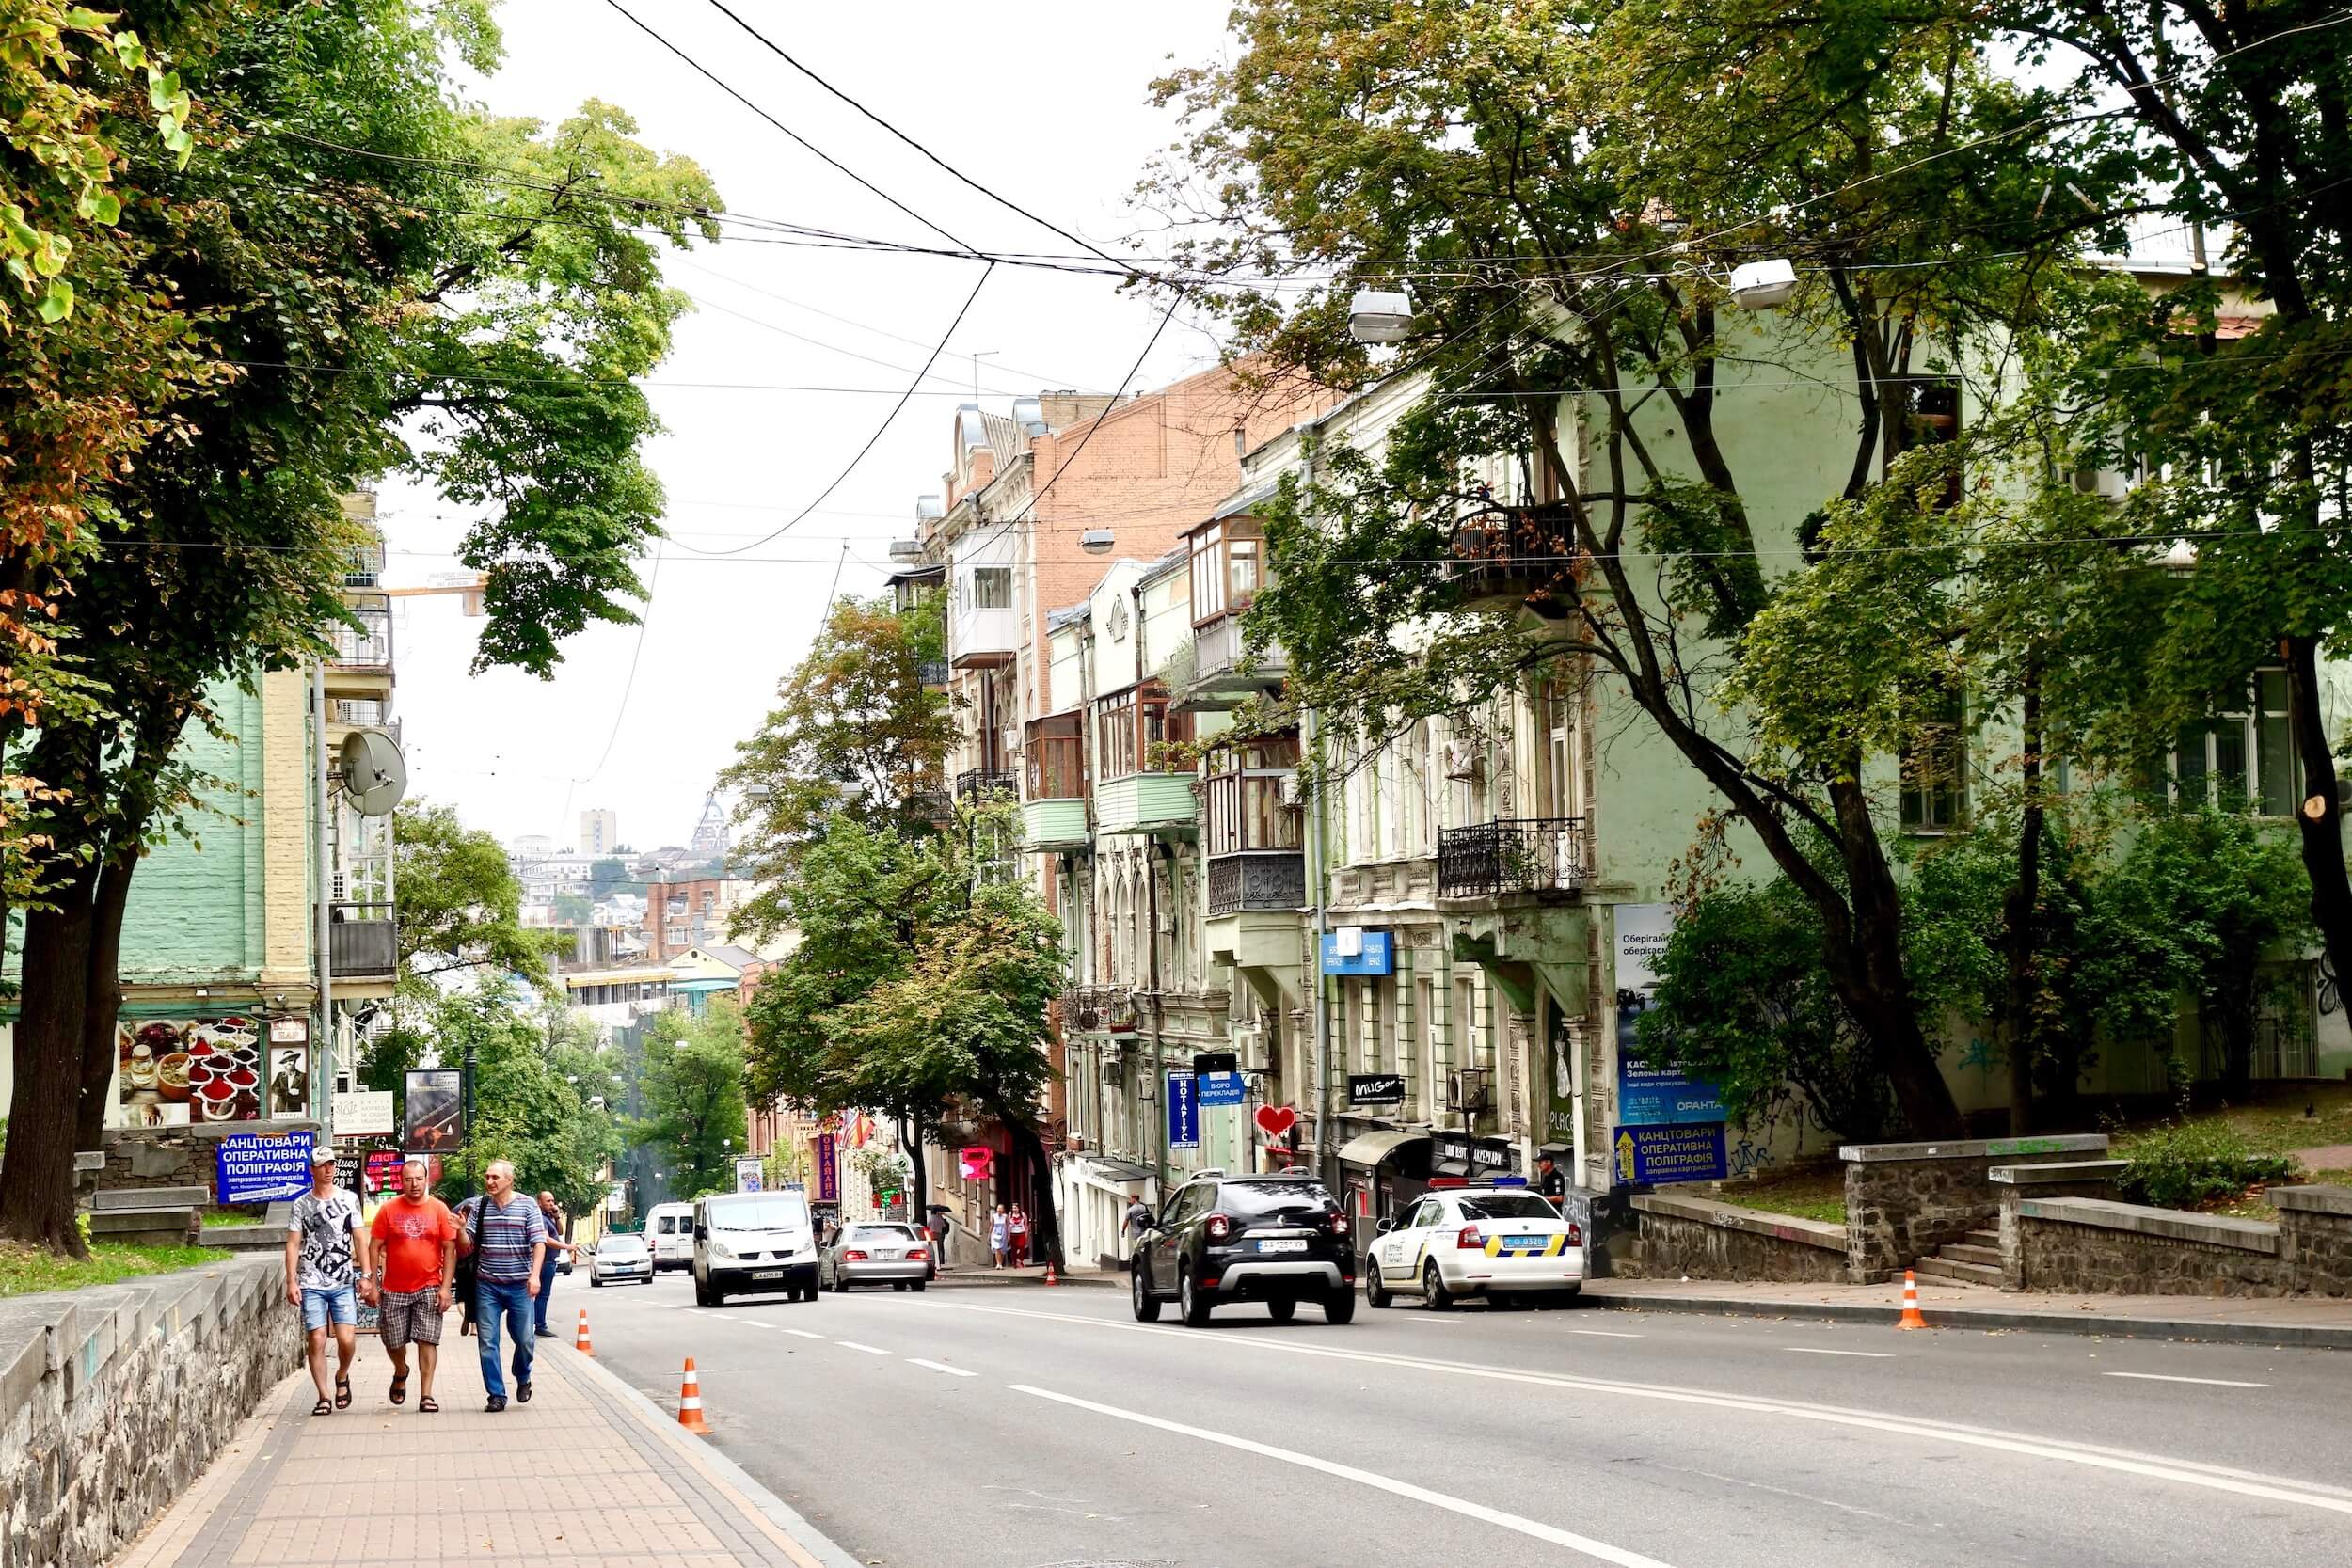 The streets of Kiev run smoothly most of the day.  Normal rush hour traffic exists but otherwise low drama.  